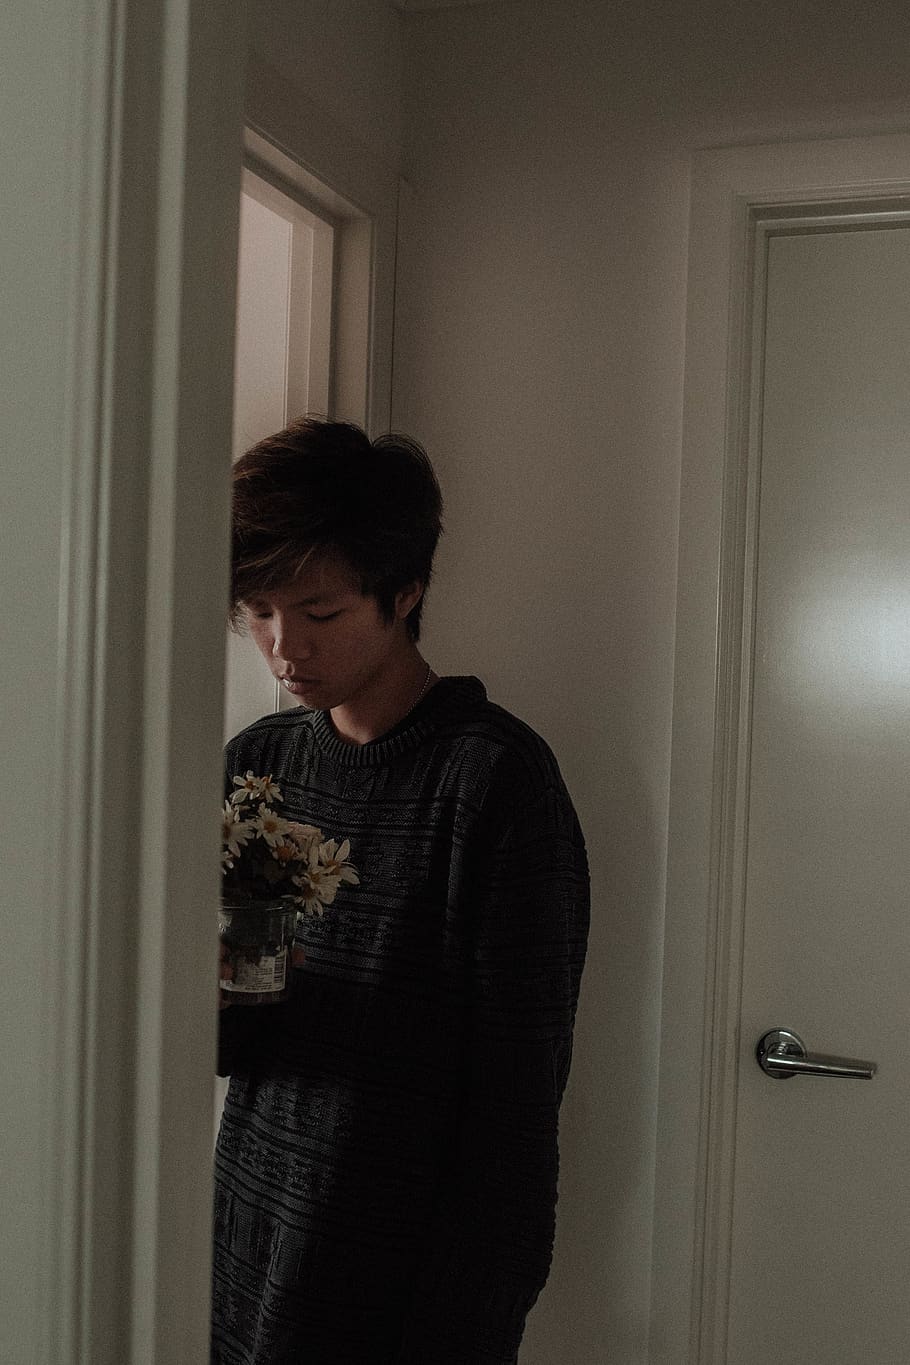 A man in a black sweater holding a vase of flowers - Grunge